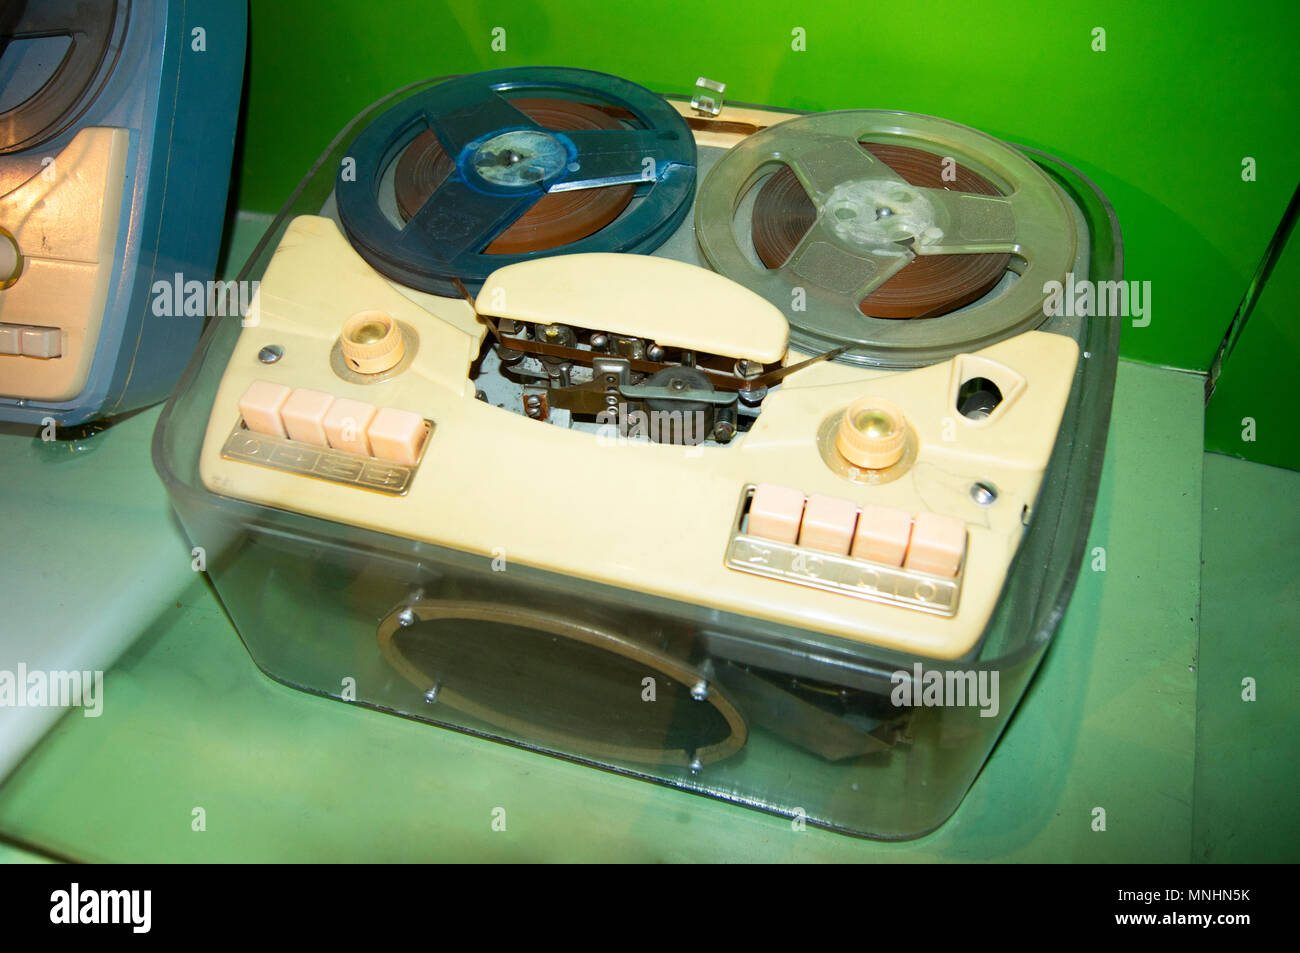 https://c8.alamy.com/comp/MNHN5K/an-old-reel-to-reel-tape-recorder-on-display-at-the-china-science-and-technology-museum-in-beijing-china-MNHN5K.jpg